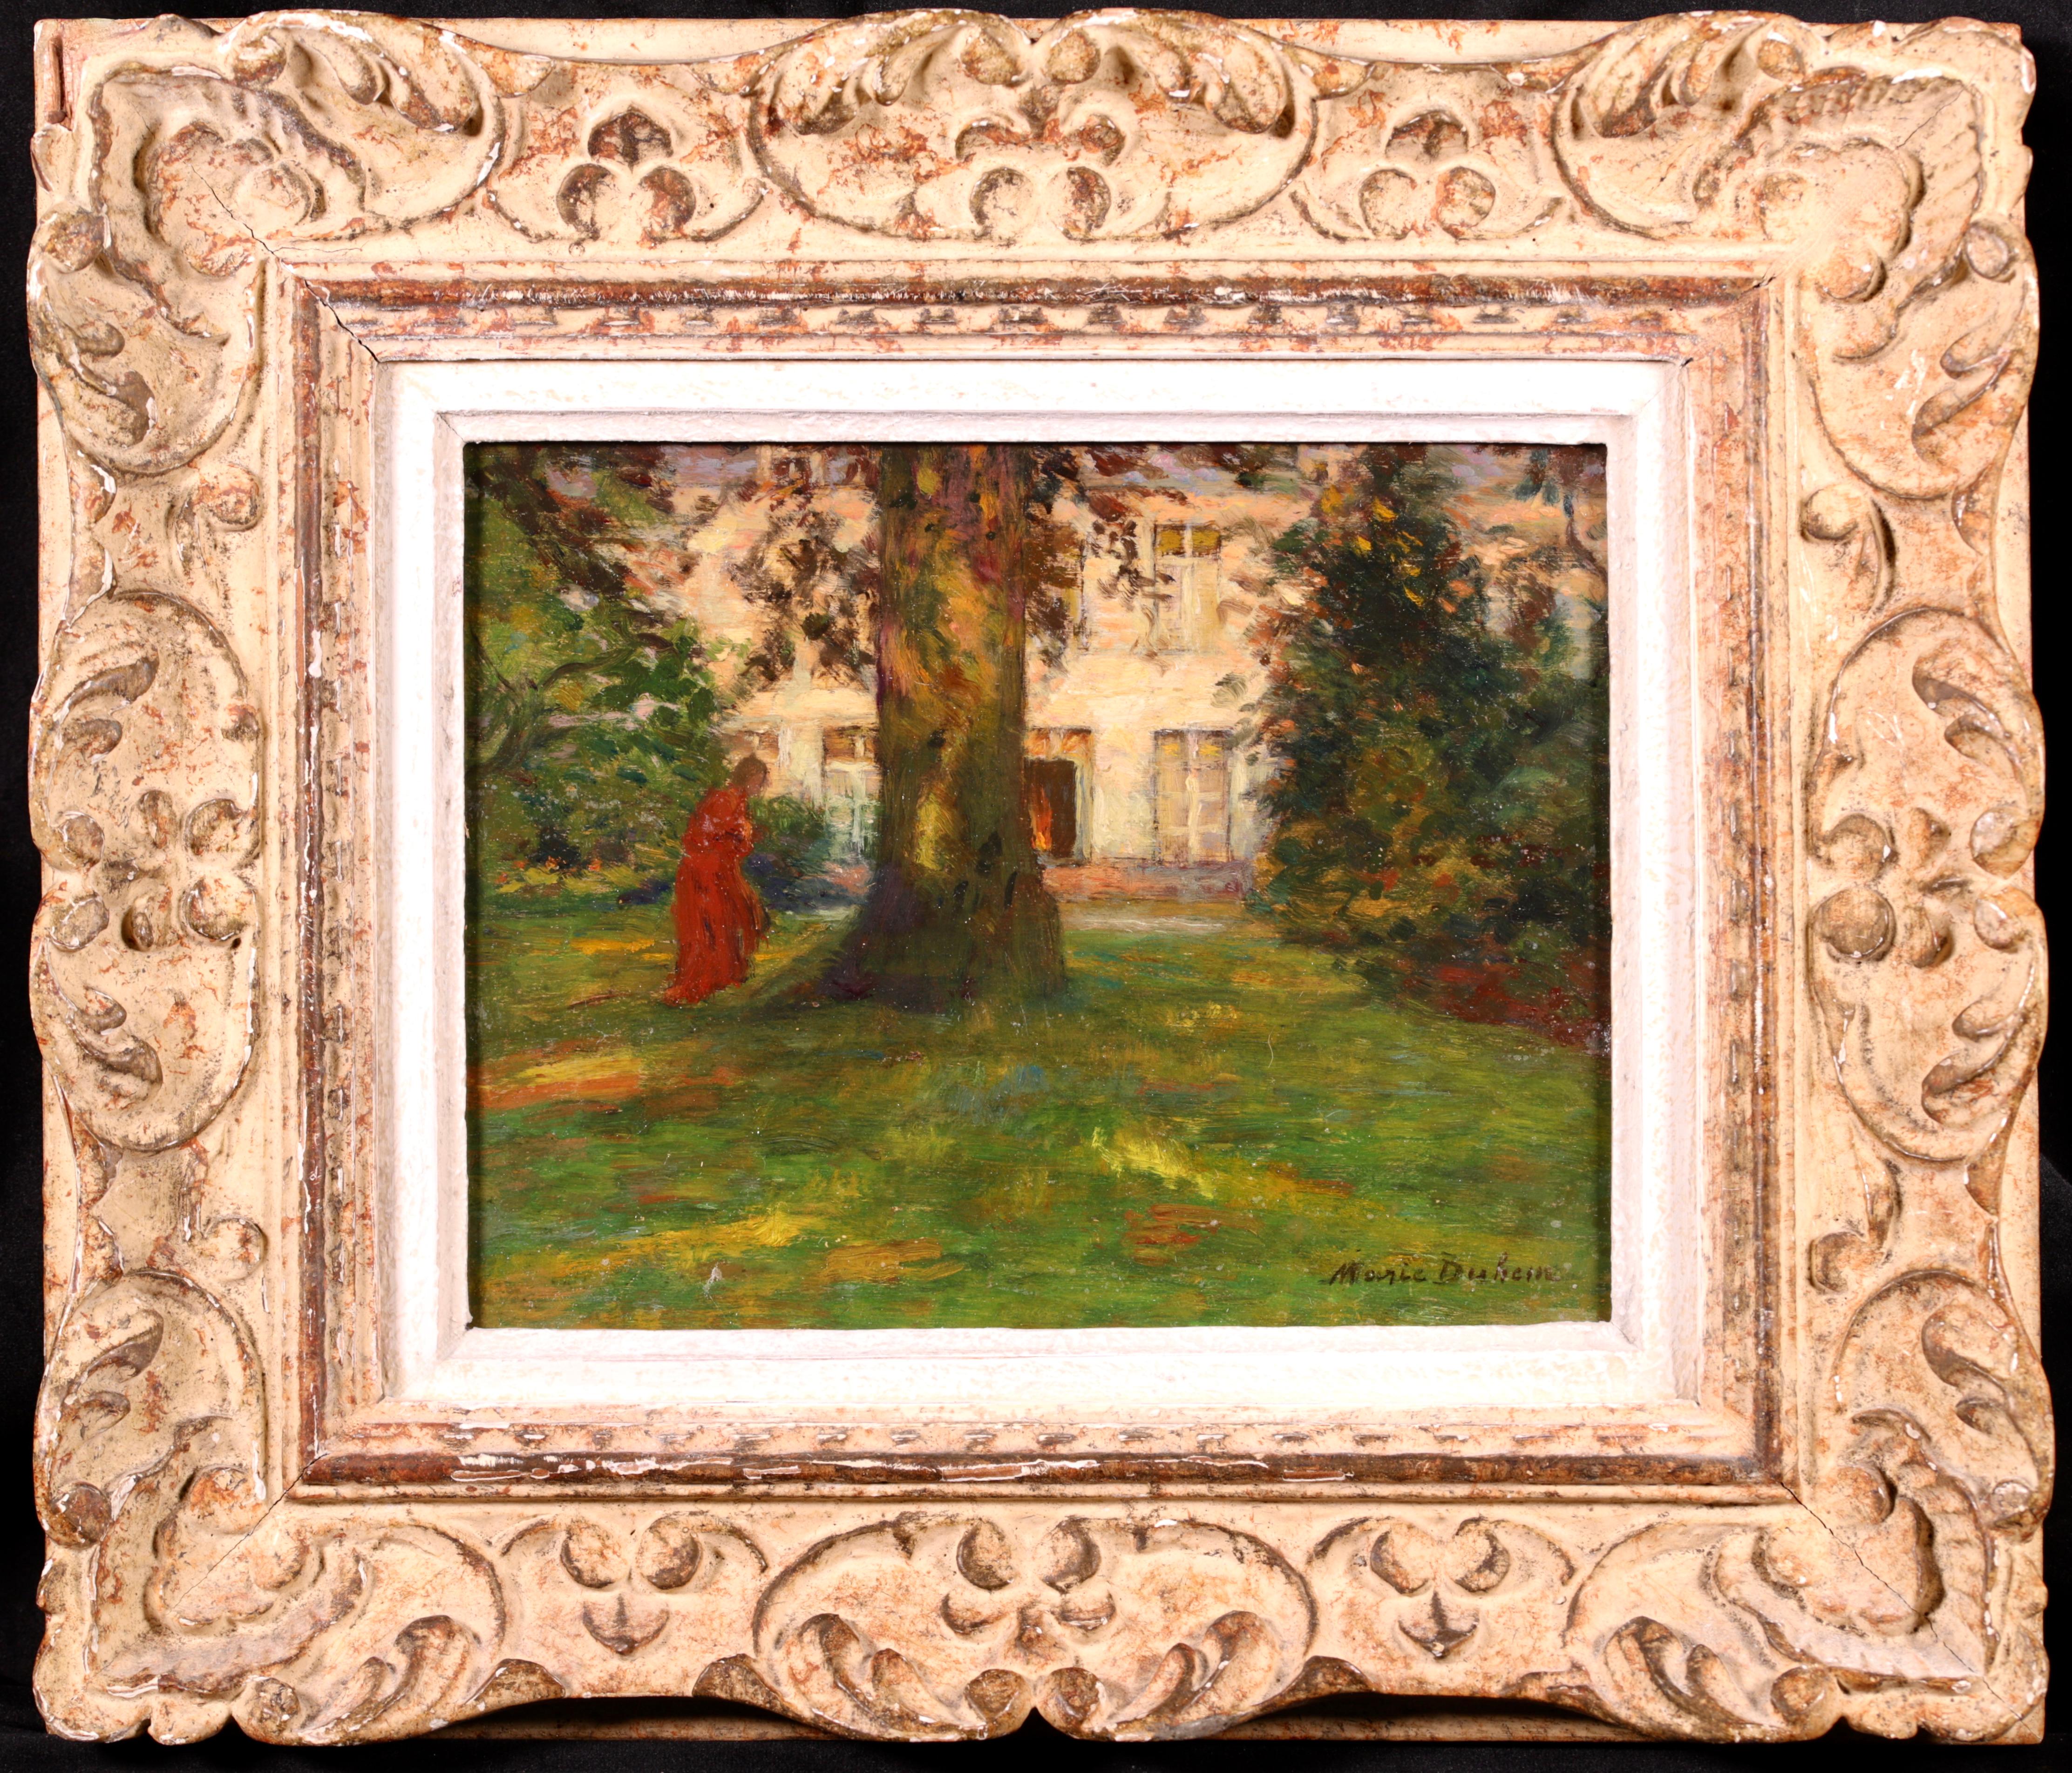 Oil on panel dated 1906 by French Impressionist painter Marie Duhem. The piece depicts a woman in a red dress standing in the shade of a tree in a garden on a sunny day. There is a view of the artist's white house behind the tree.

Signature:
Signed